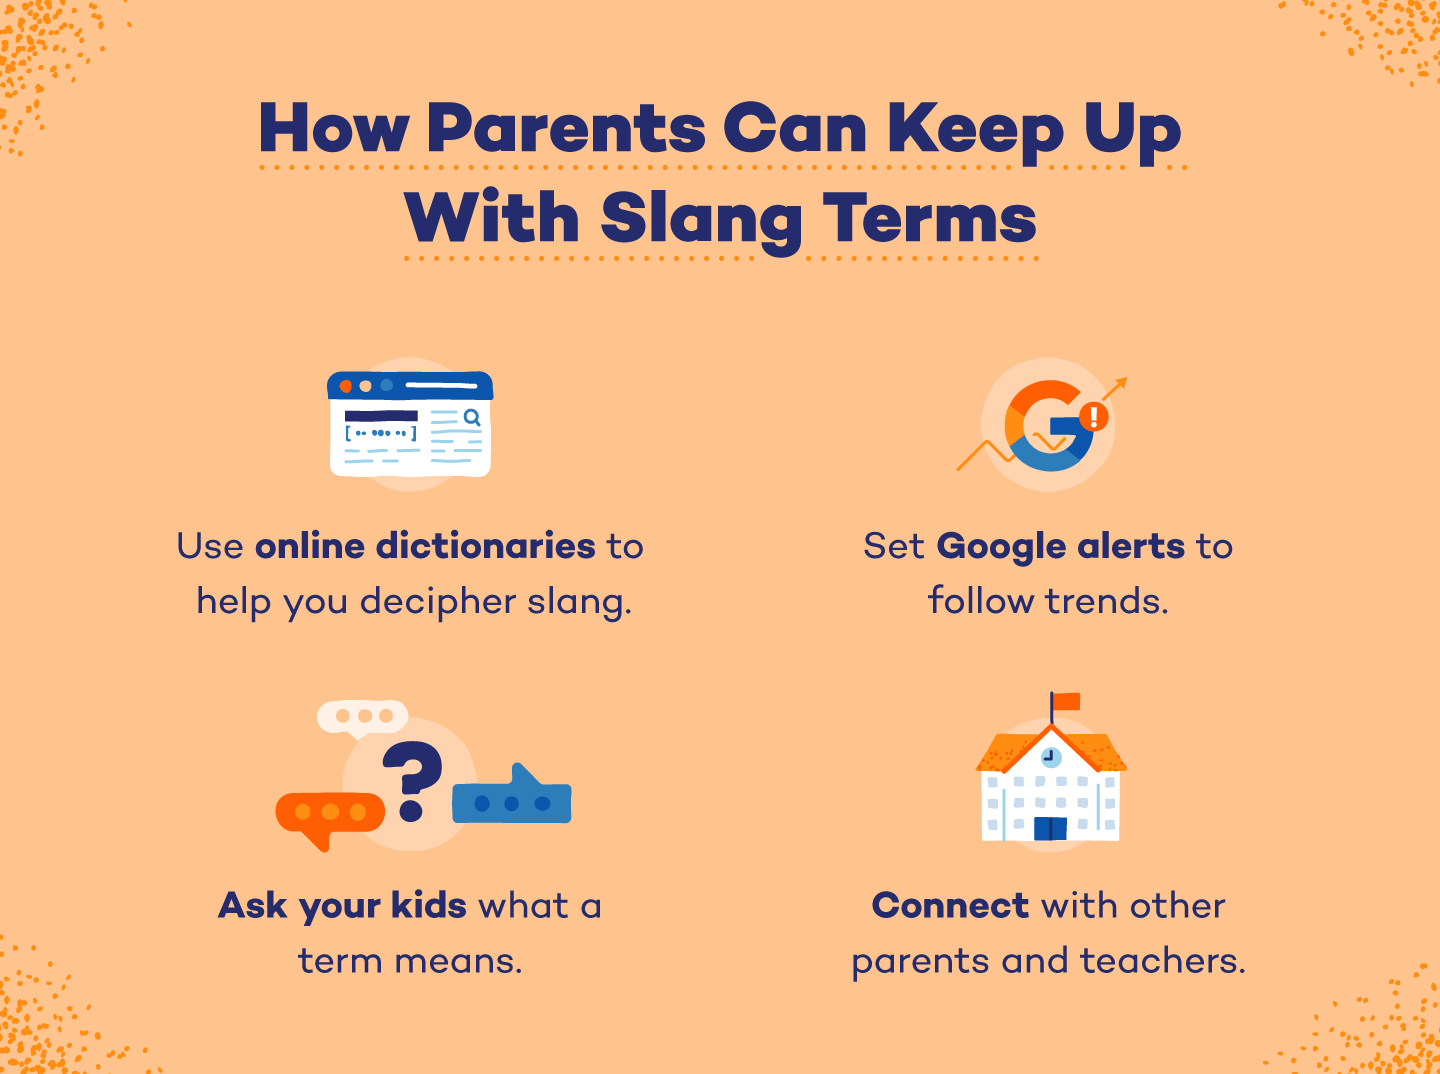 Illustration listing methods for parents to keep up with slang terms